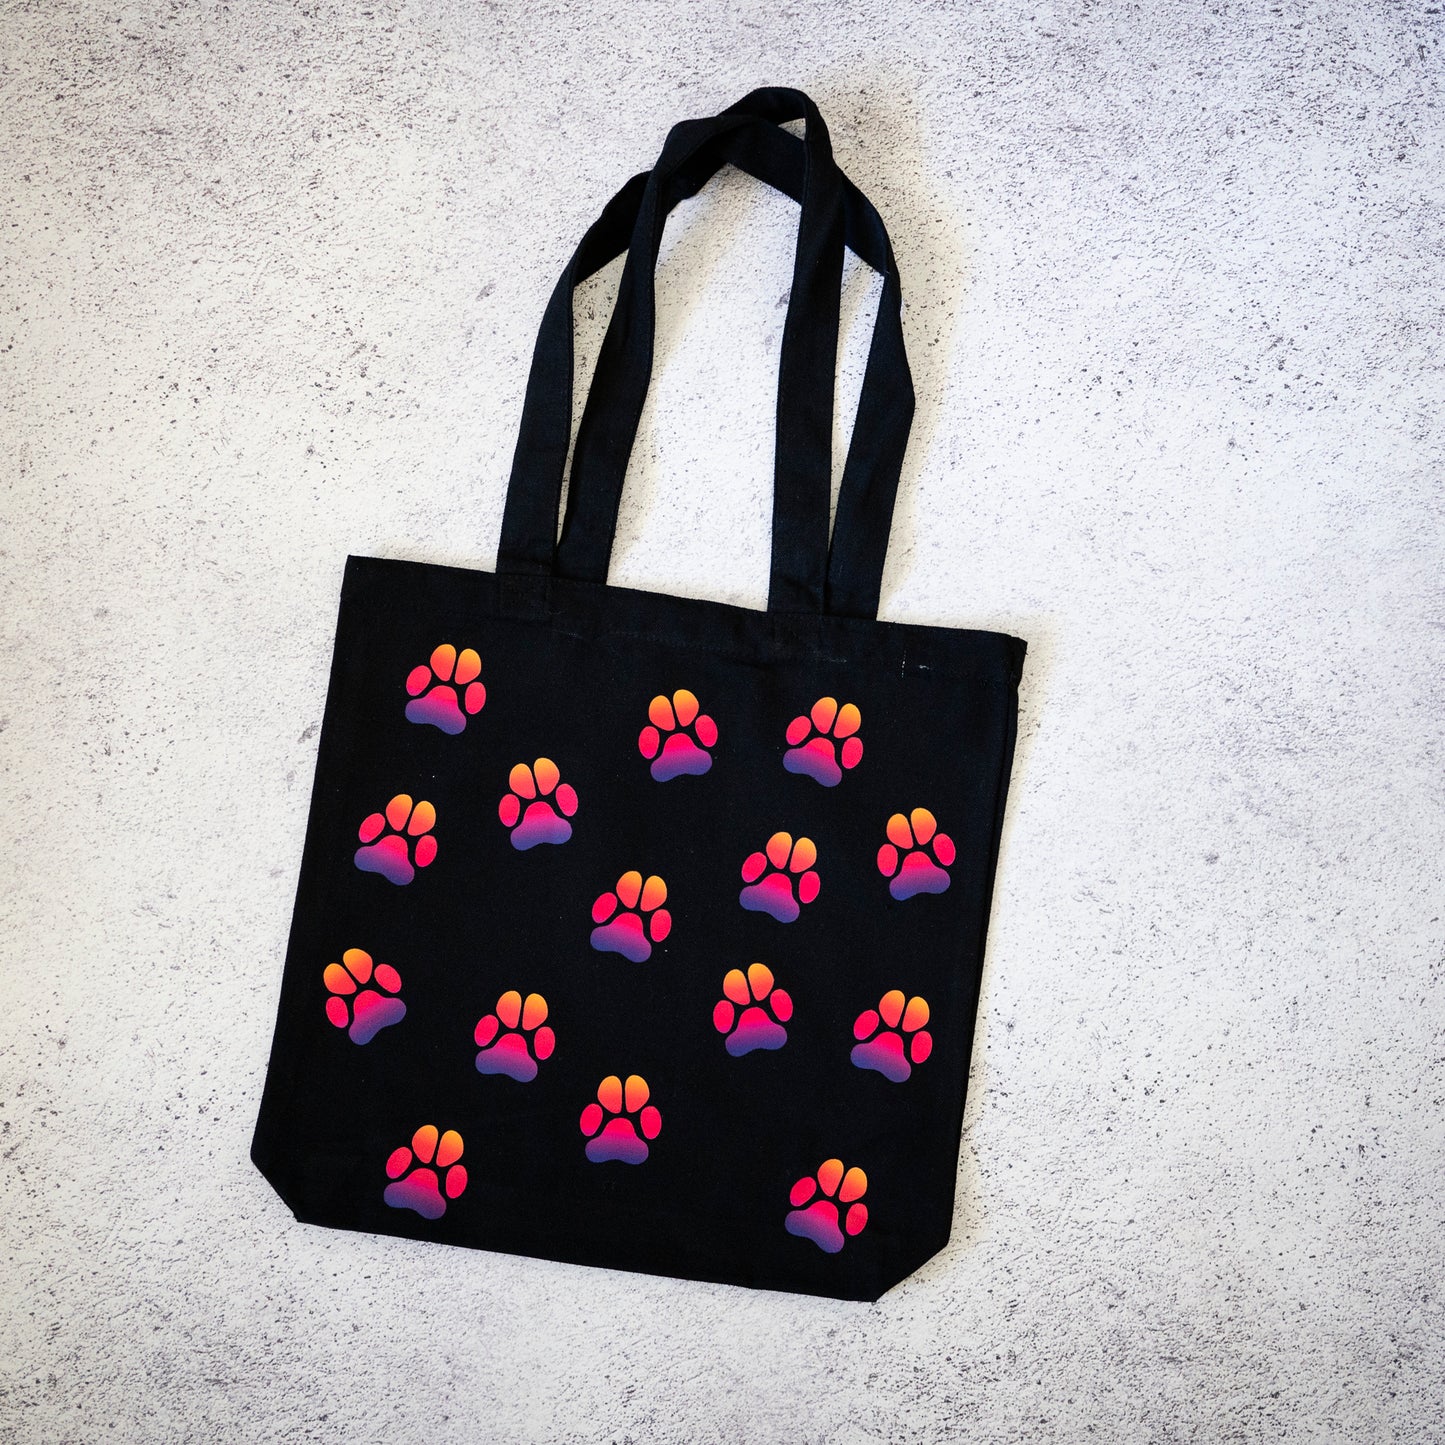 Sunset Paw Print Canvas Tote Bag